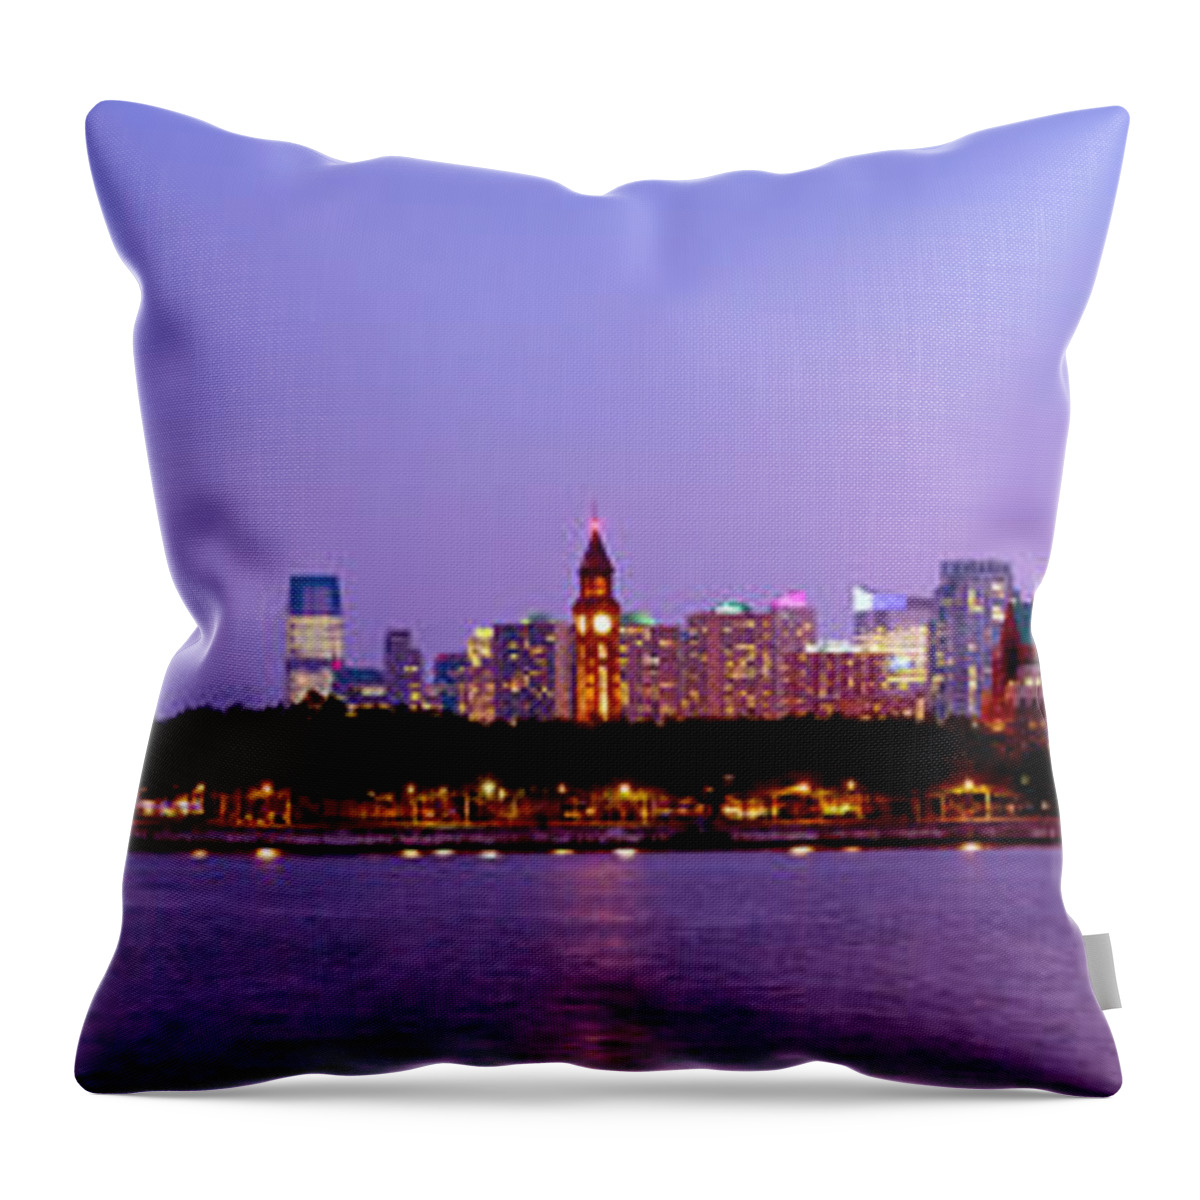 Photography Throw Pillow featuring the photograph Buildings At The Waterfront, Hoboken by Panoramic Images